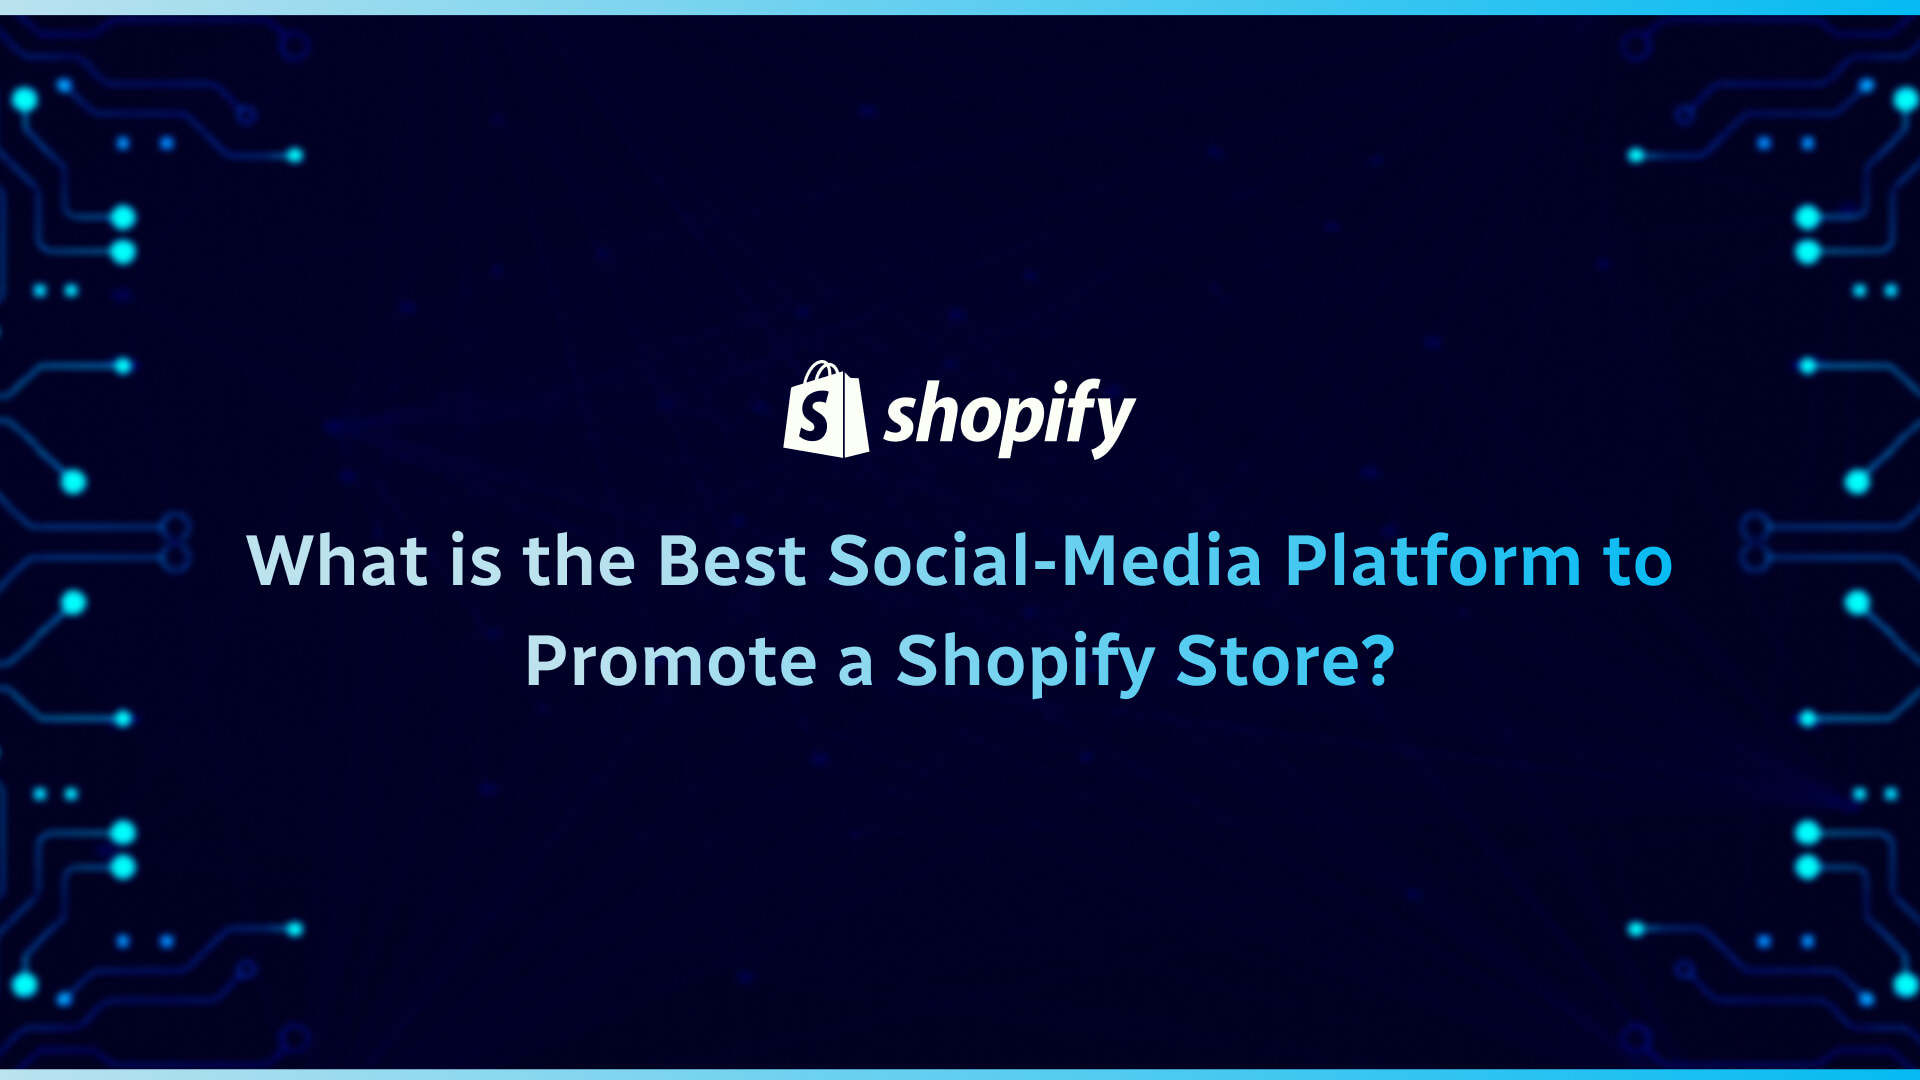 What is the Best Social-Media Platform to Promote a Shopify Store?